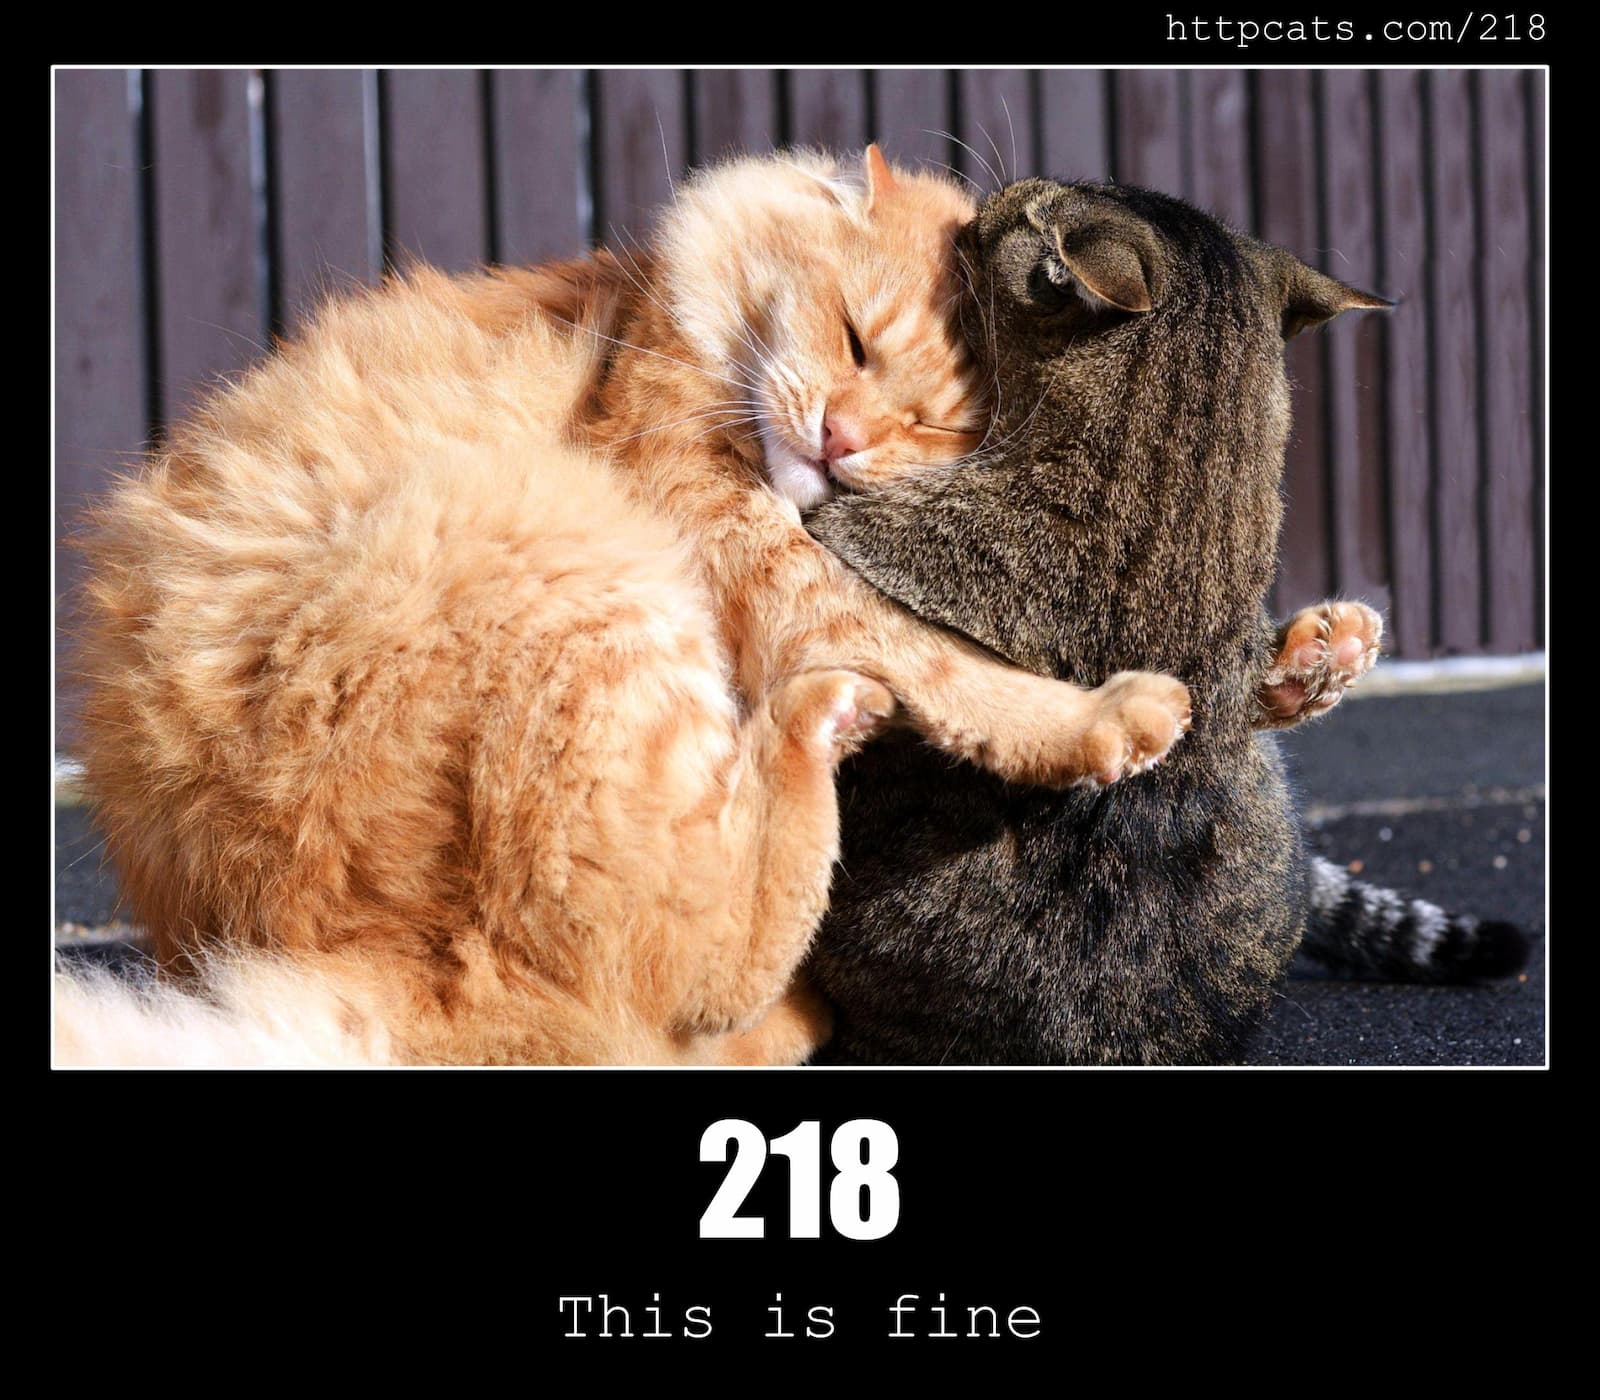 HTTP Status Code 218 This is fine & Cats